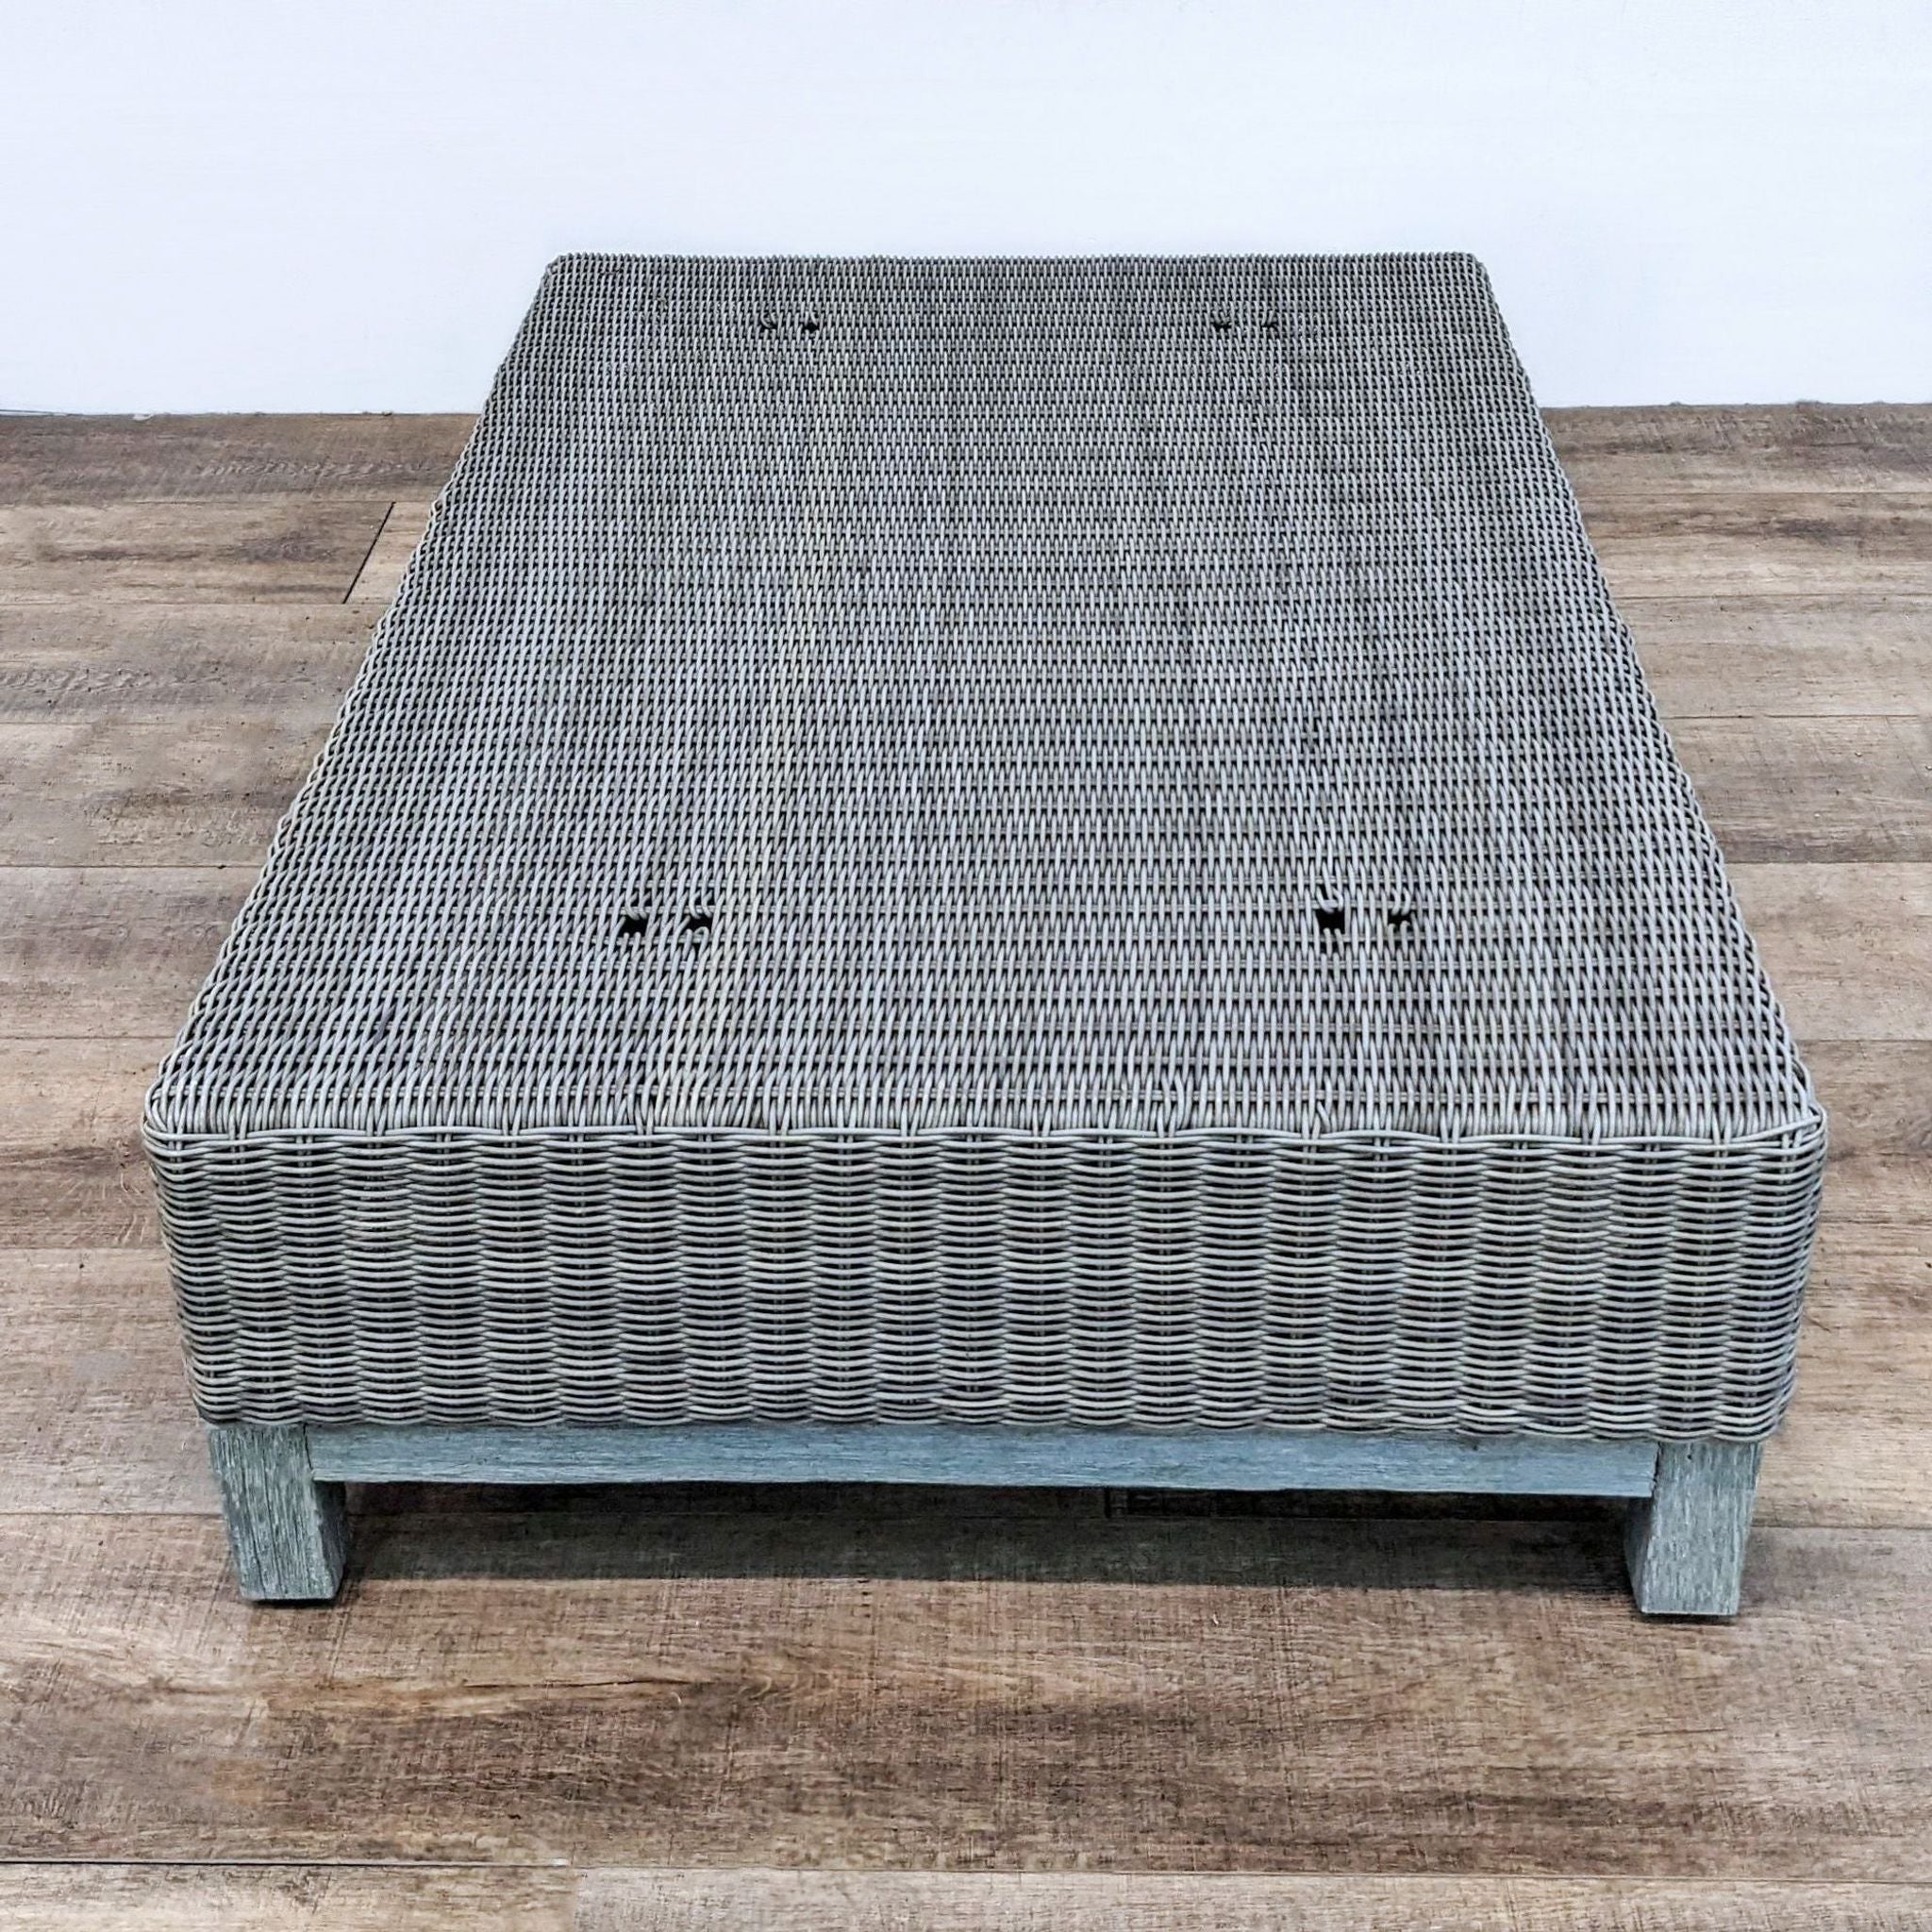 Restoration Hardware low-profile woven wicker coffee table on a weathered wooden base.